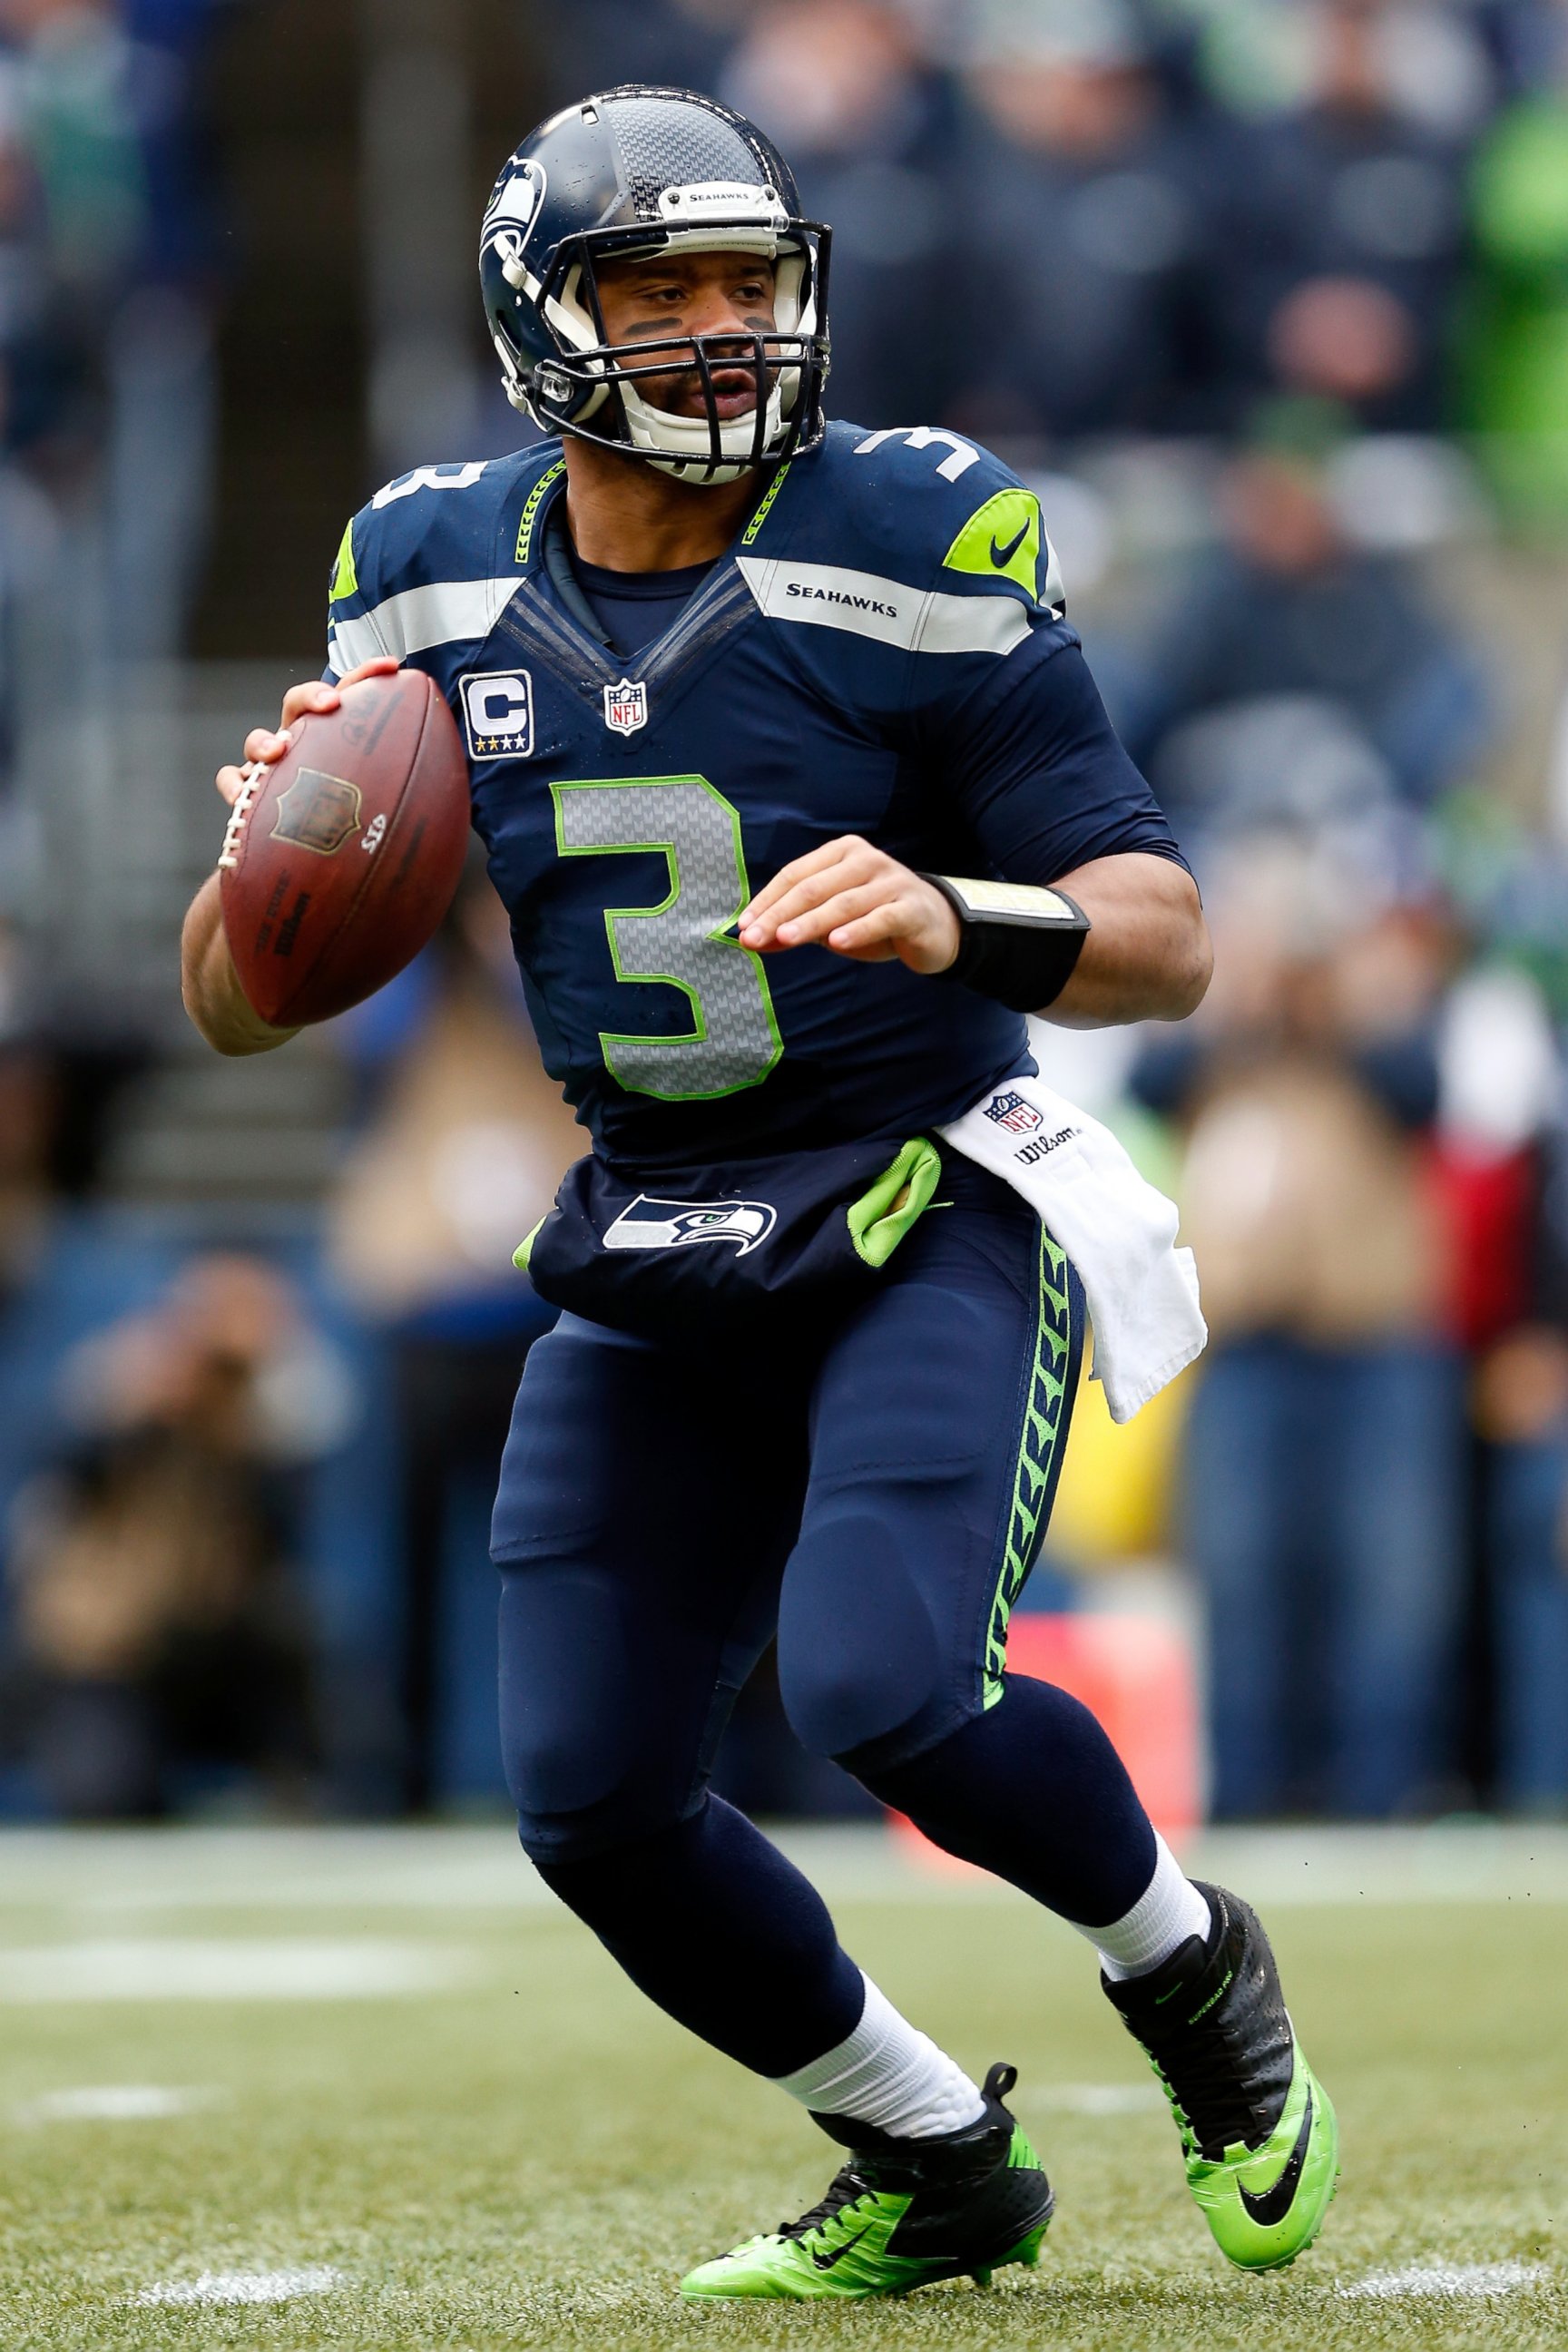 PHOTO: Russell Wilson of the Seattle Seahawks is pictured in a game against the Green Bay Packers during the 2015 NFC Championship game at CenturyLink Field on Jan. 18, 2015 in Seattle.